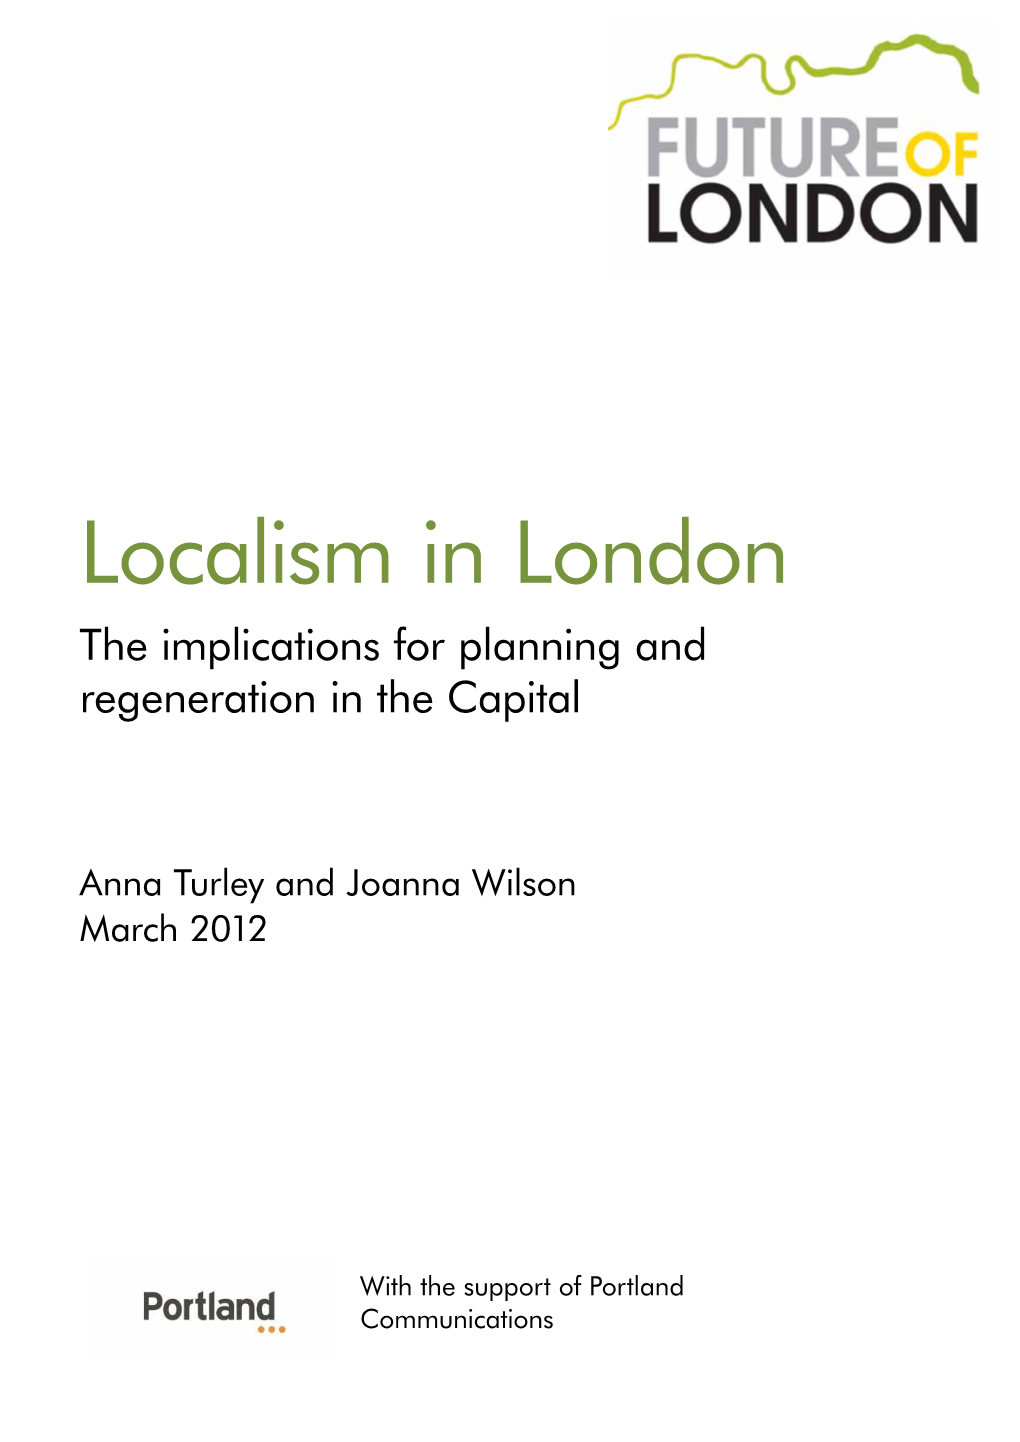 The Implications for Planning and Regeneration in the Capital